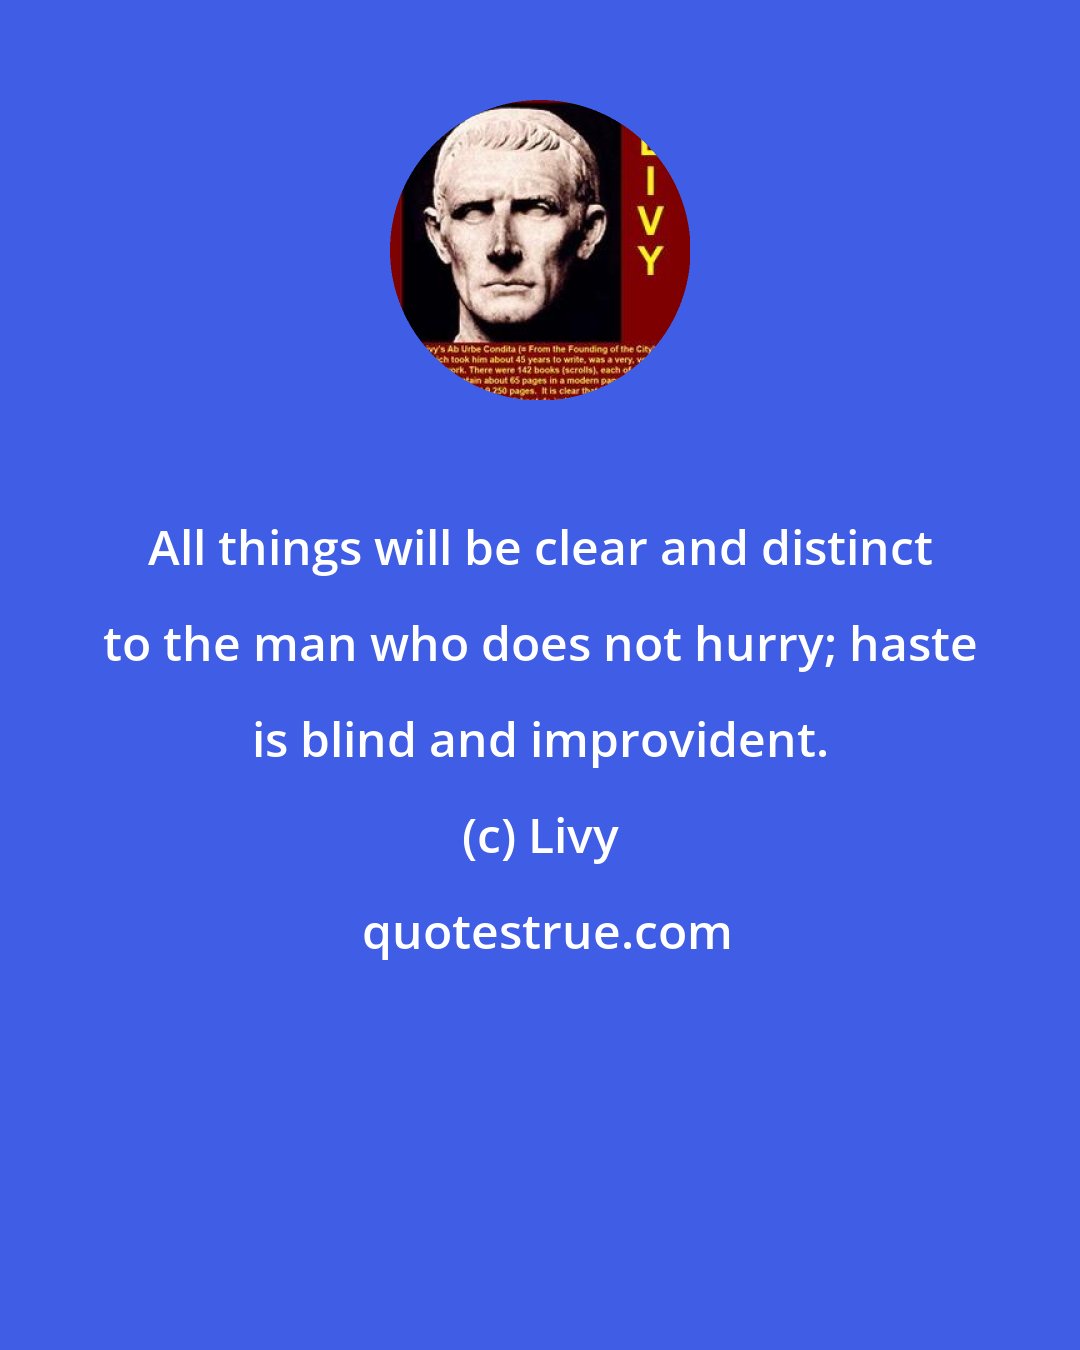 Livy: All things will be clear and distinct to the man who does not hurry; haste is blind and improvident.